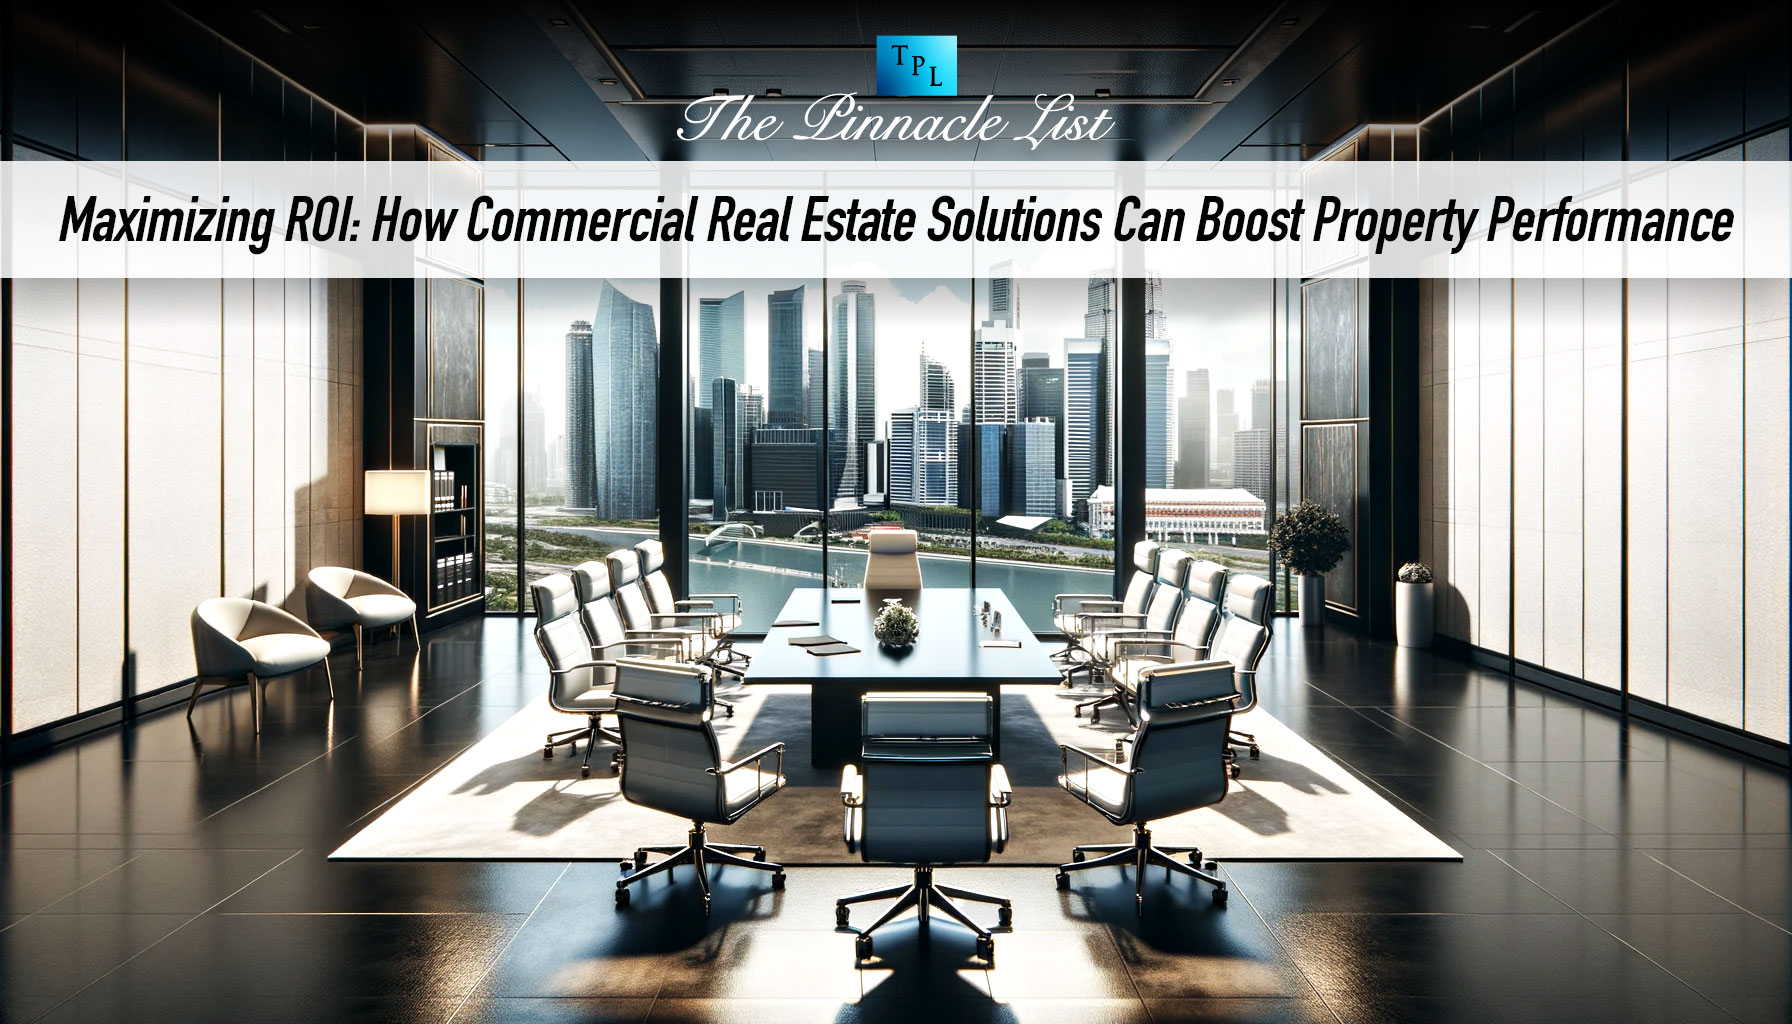 Maximizing ROI: How Commercial Real Estate Solutions Can Boost Property Performance